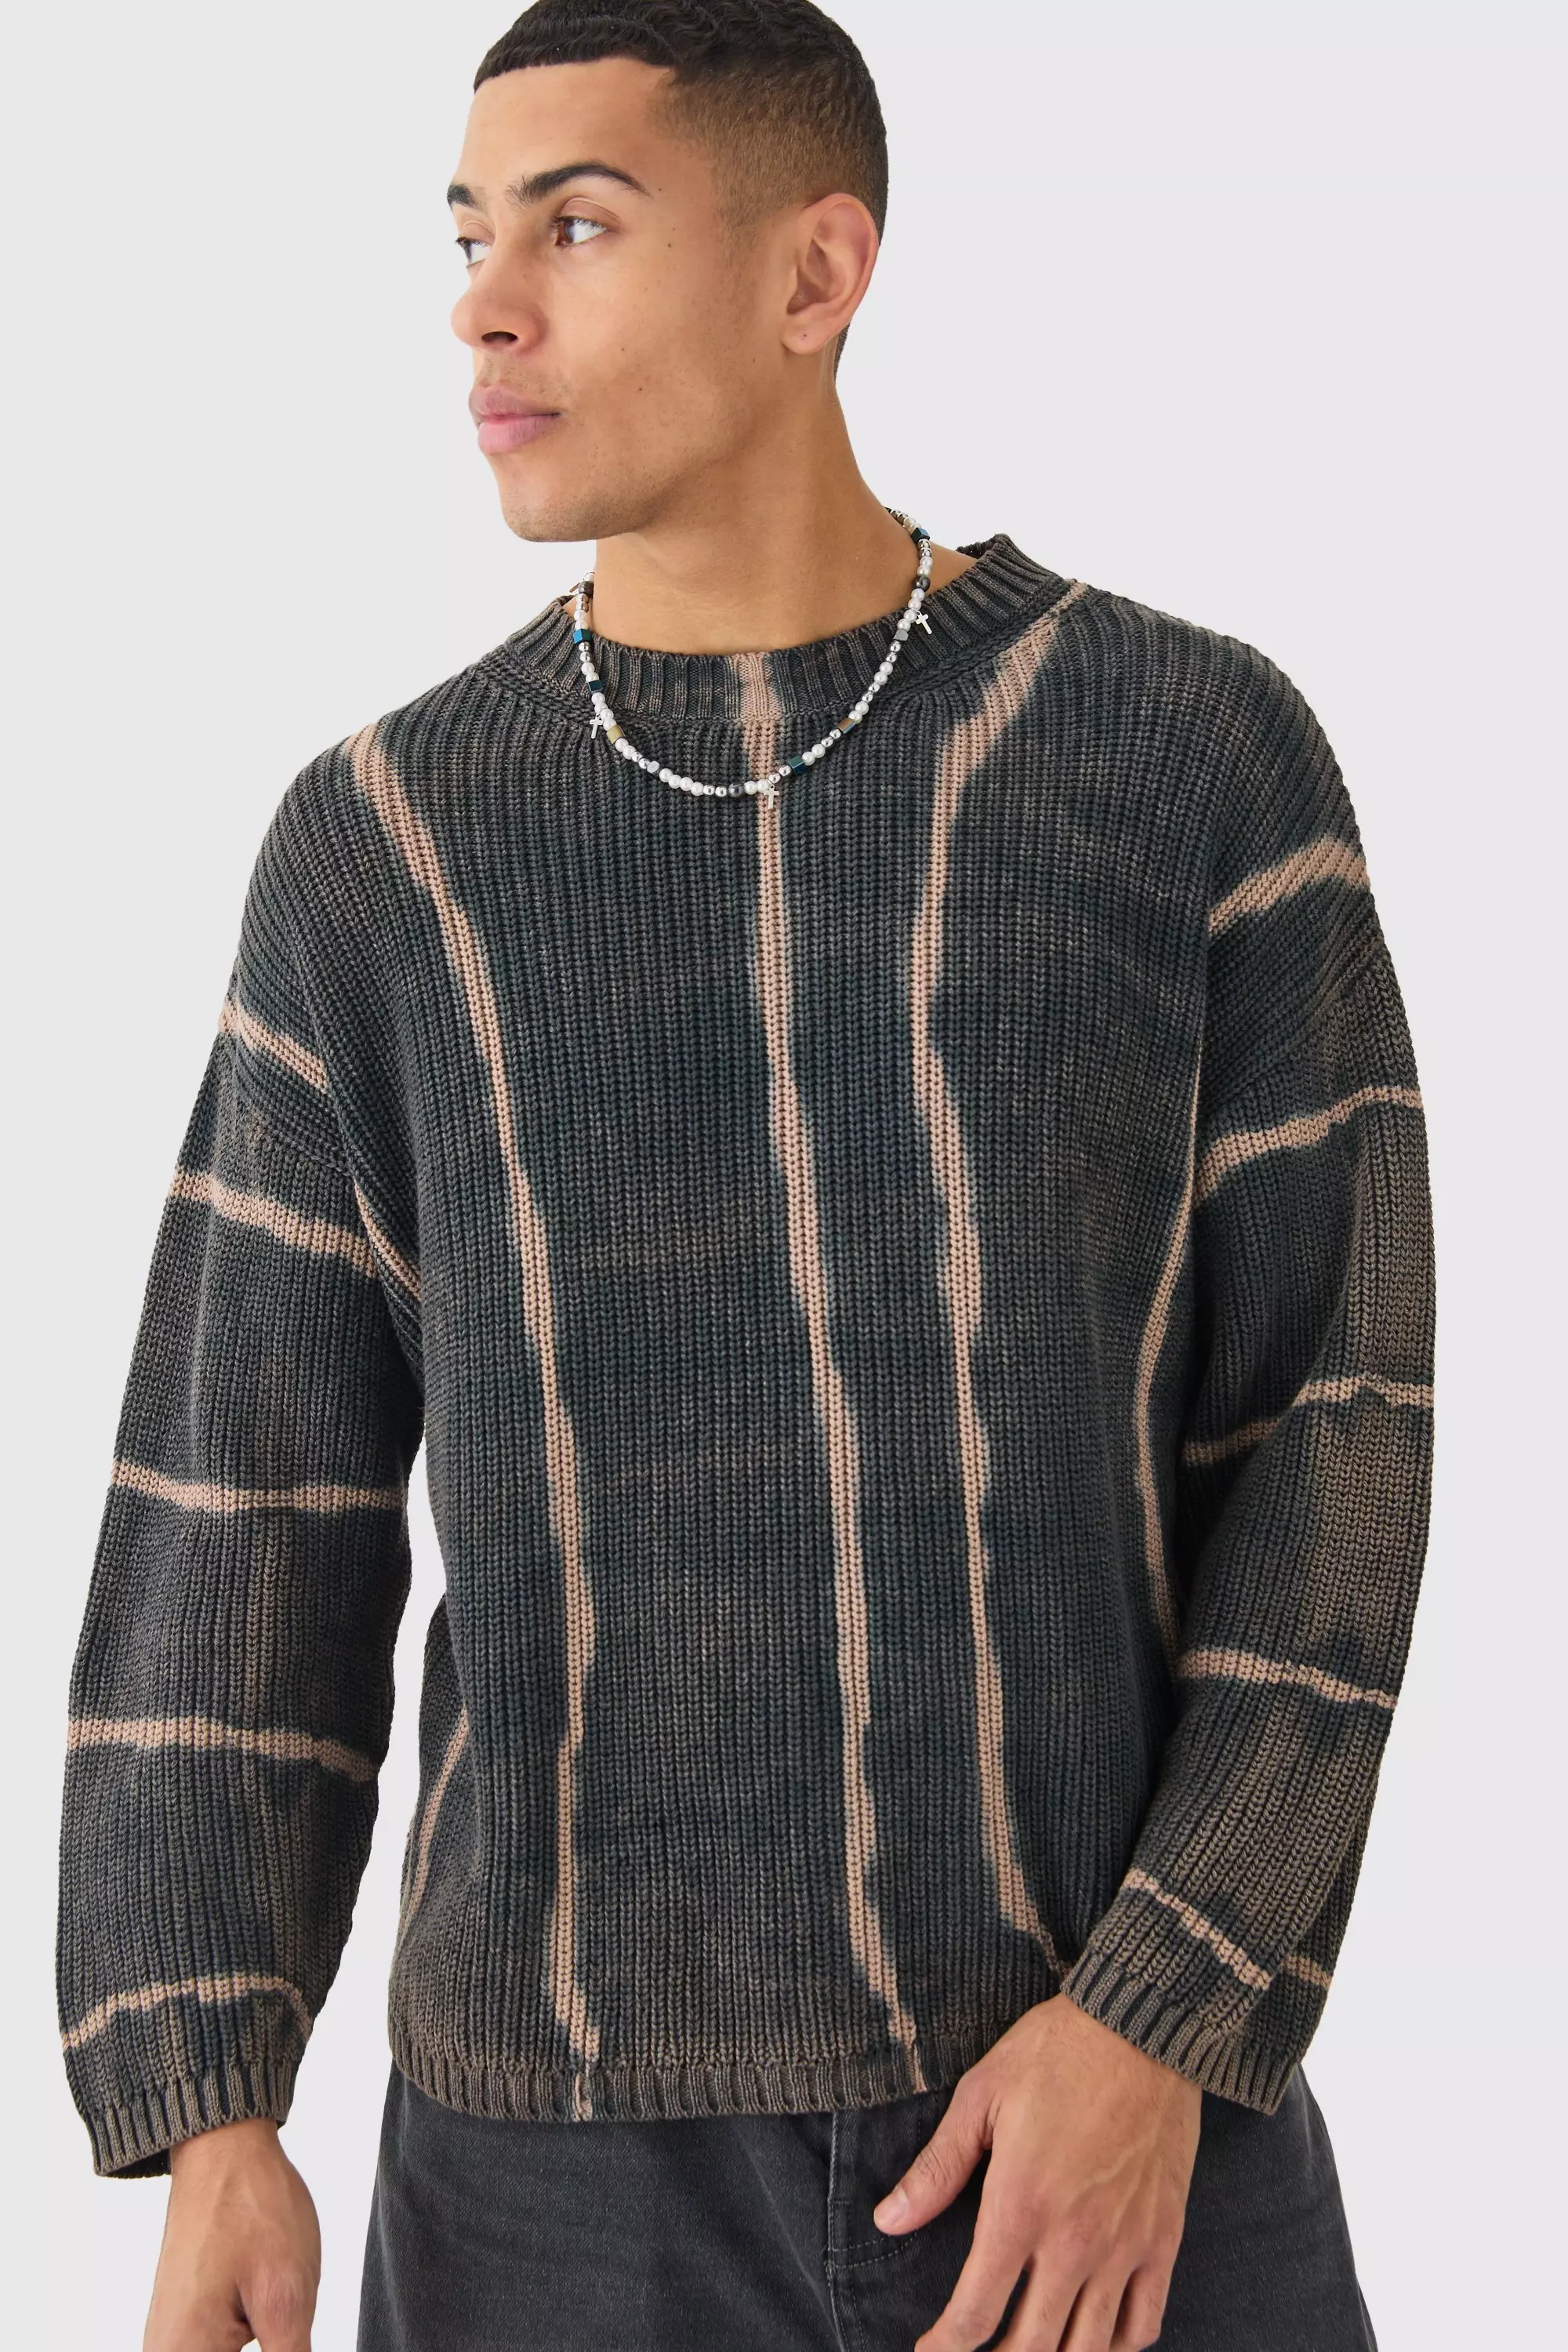 Oversized Boxy Stone Wash Jumper In Charcoal Charcoal